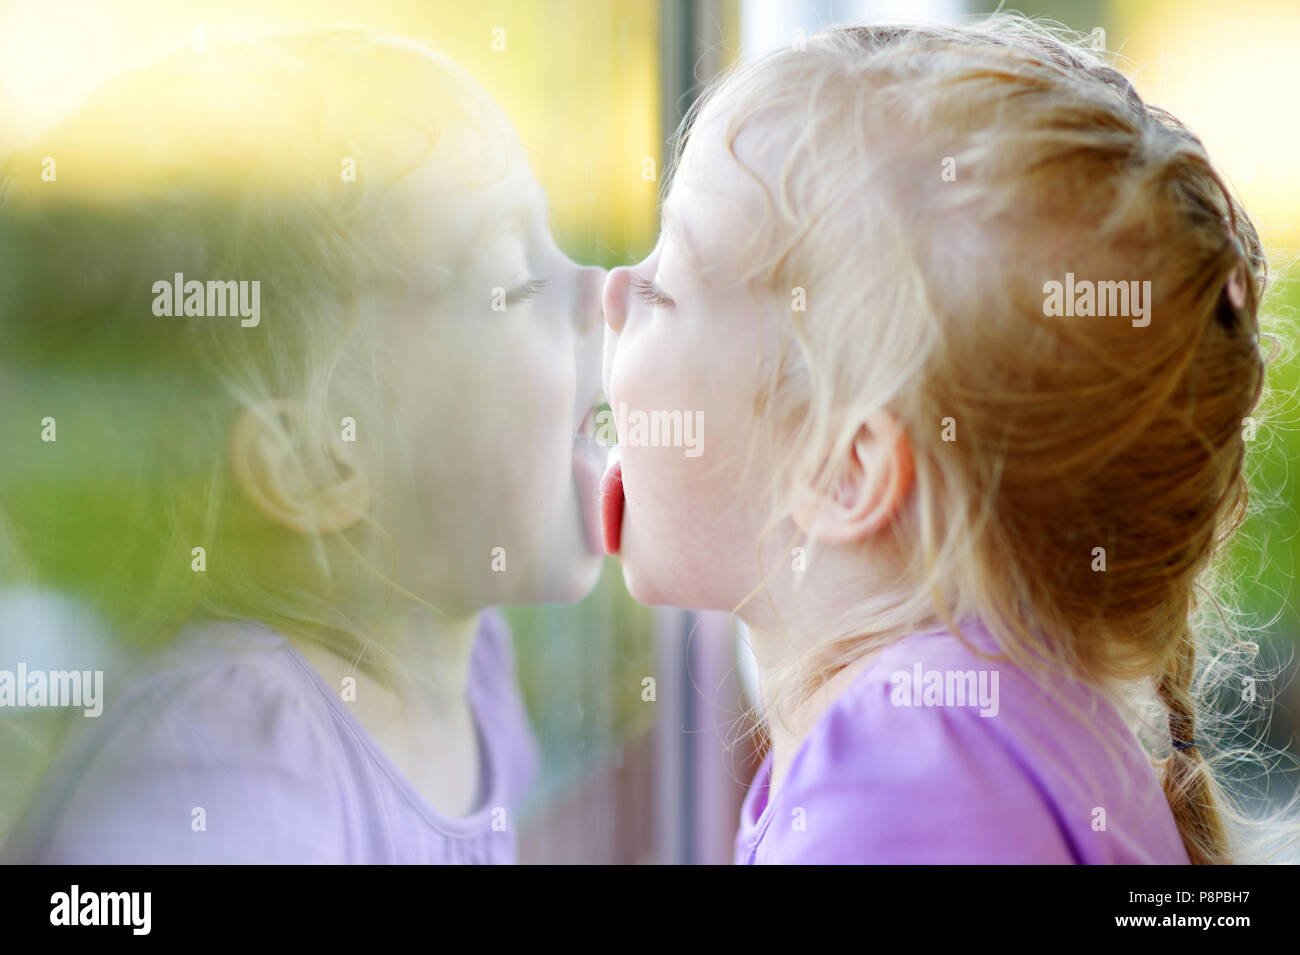 cute-funny-little-girl-licking-her-reflection-on-a-window-glass-P8PBH7.jpg